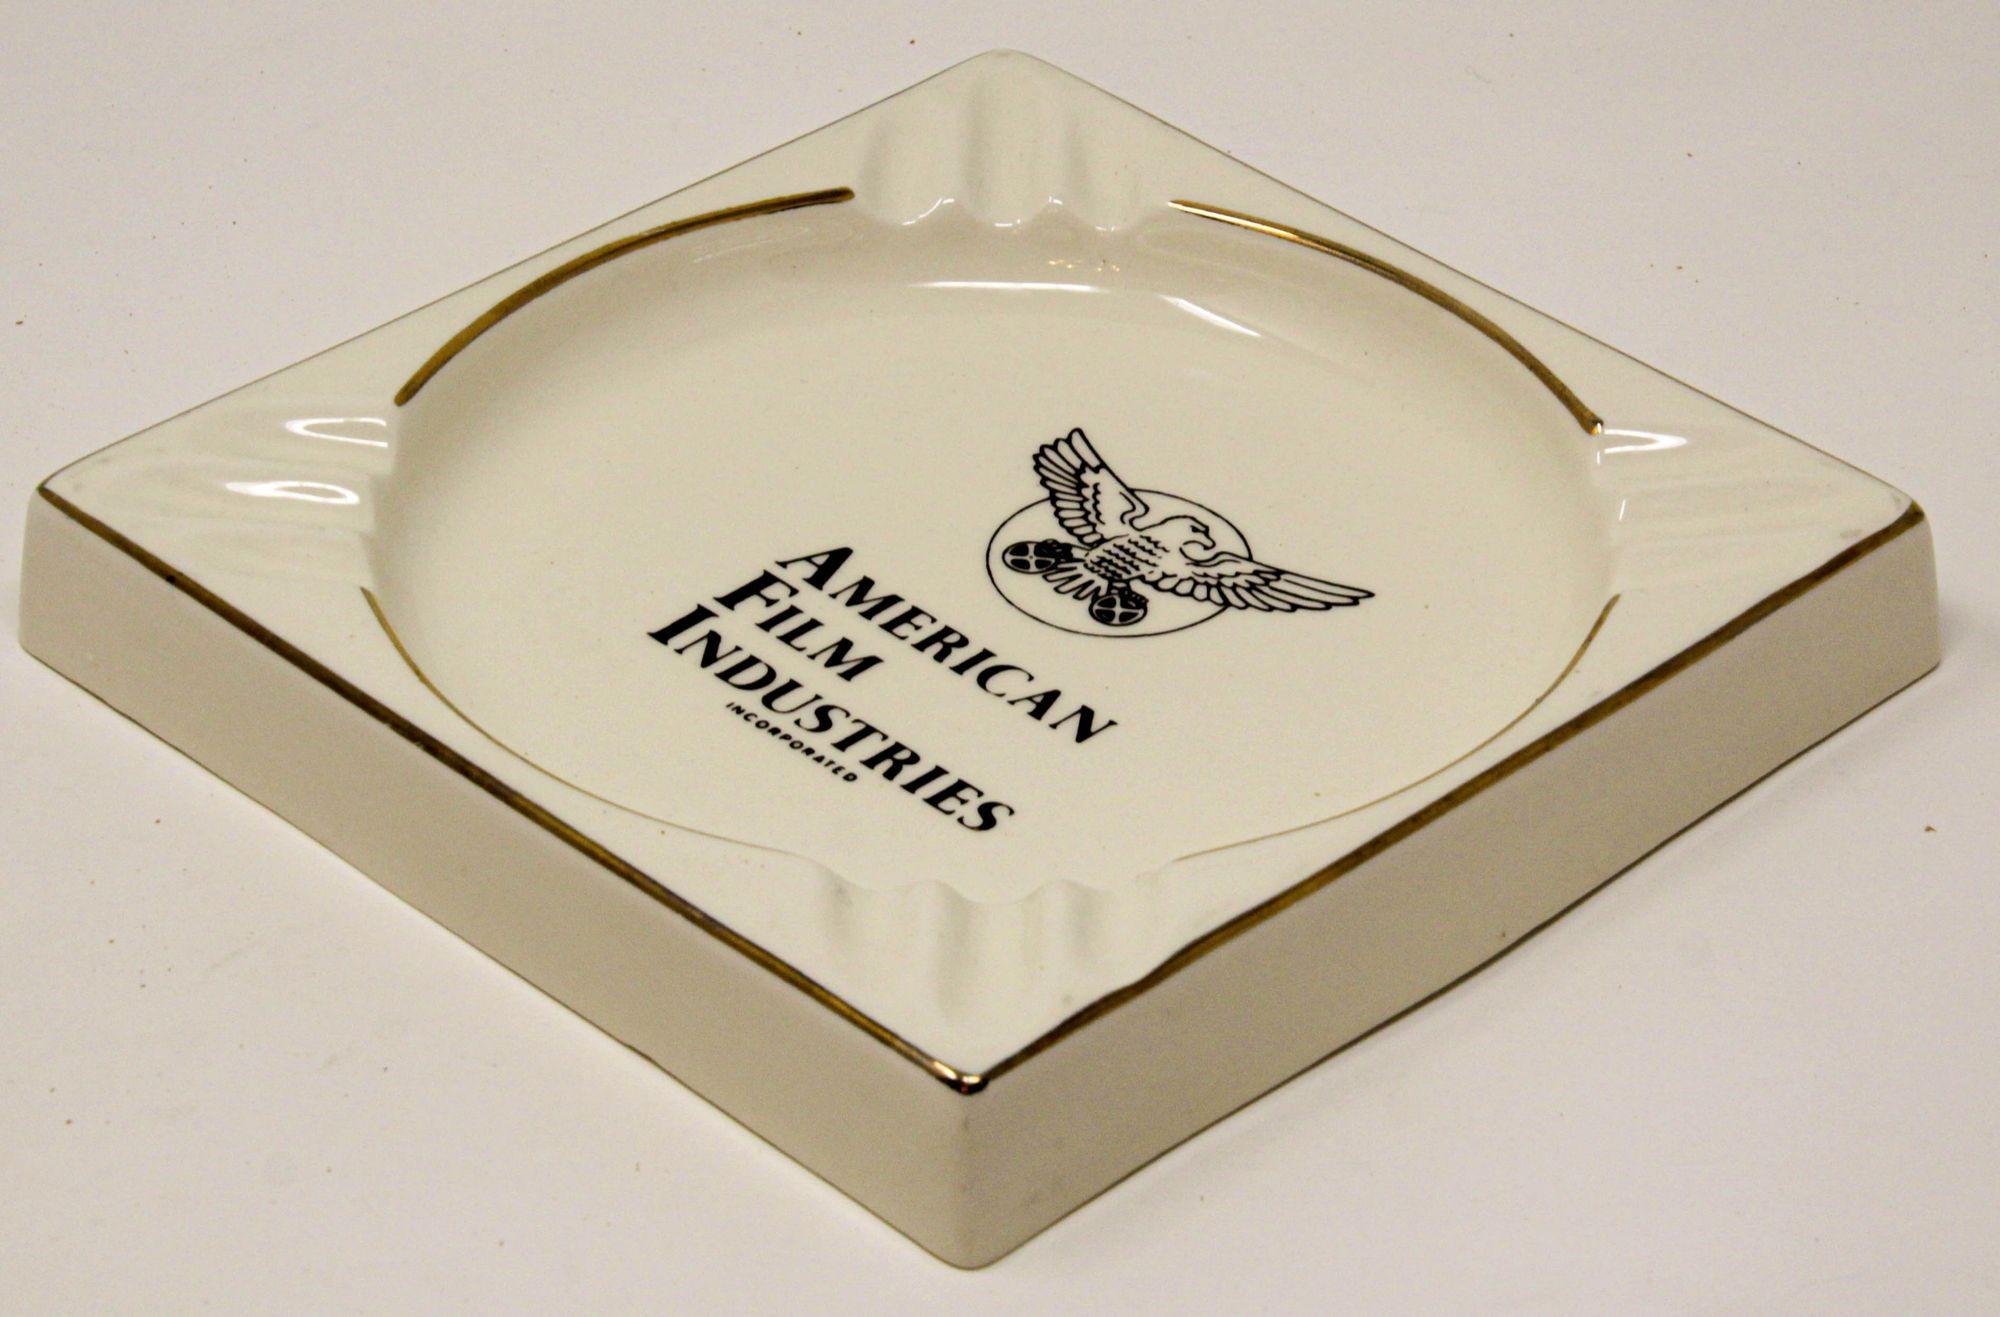 Large vintage American Film Industries Incorporated large ceramic beige ivory and gold ashtray.
Vintage American film industries incorporated large sized ashtray.
Art Deco style large square cigar ashtray in high gloss finish cream ivory color